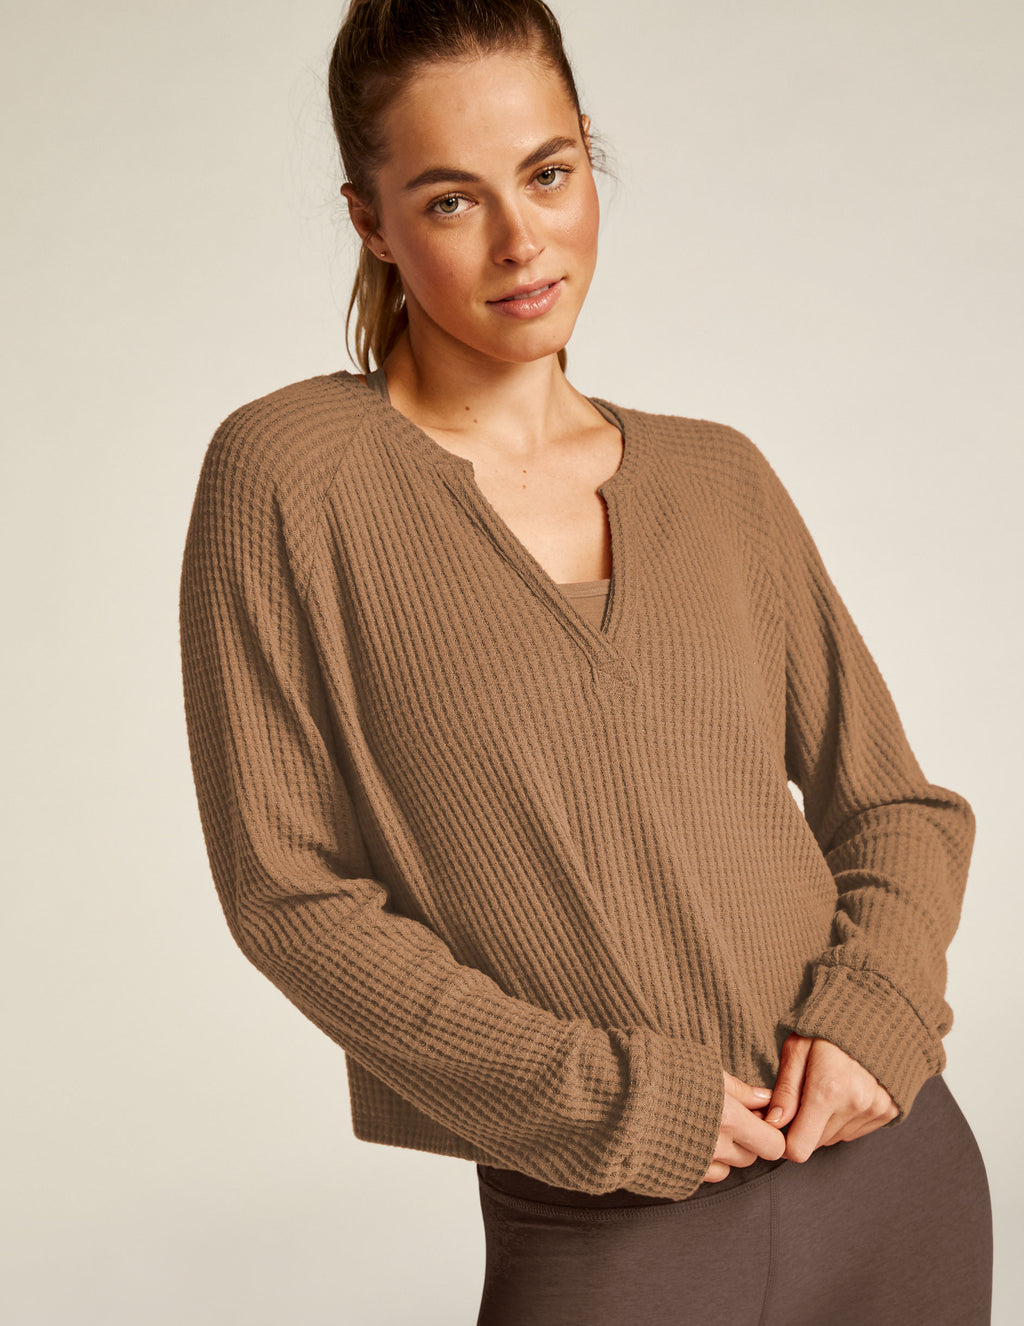 Free Style Pullover Featured Image